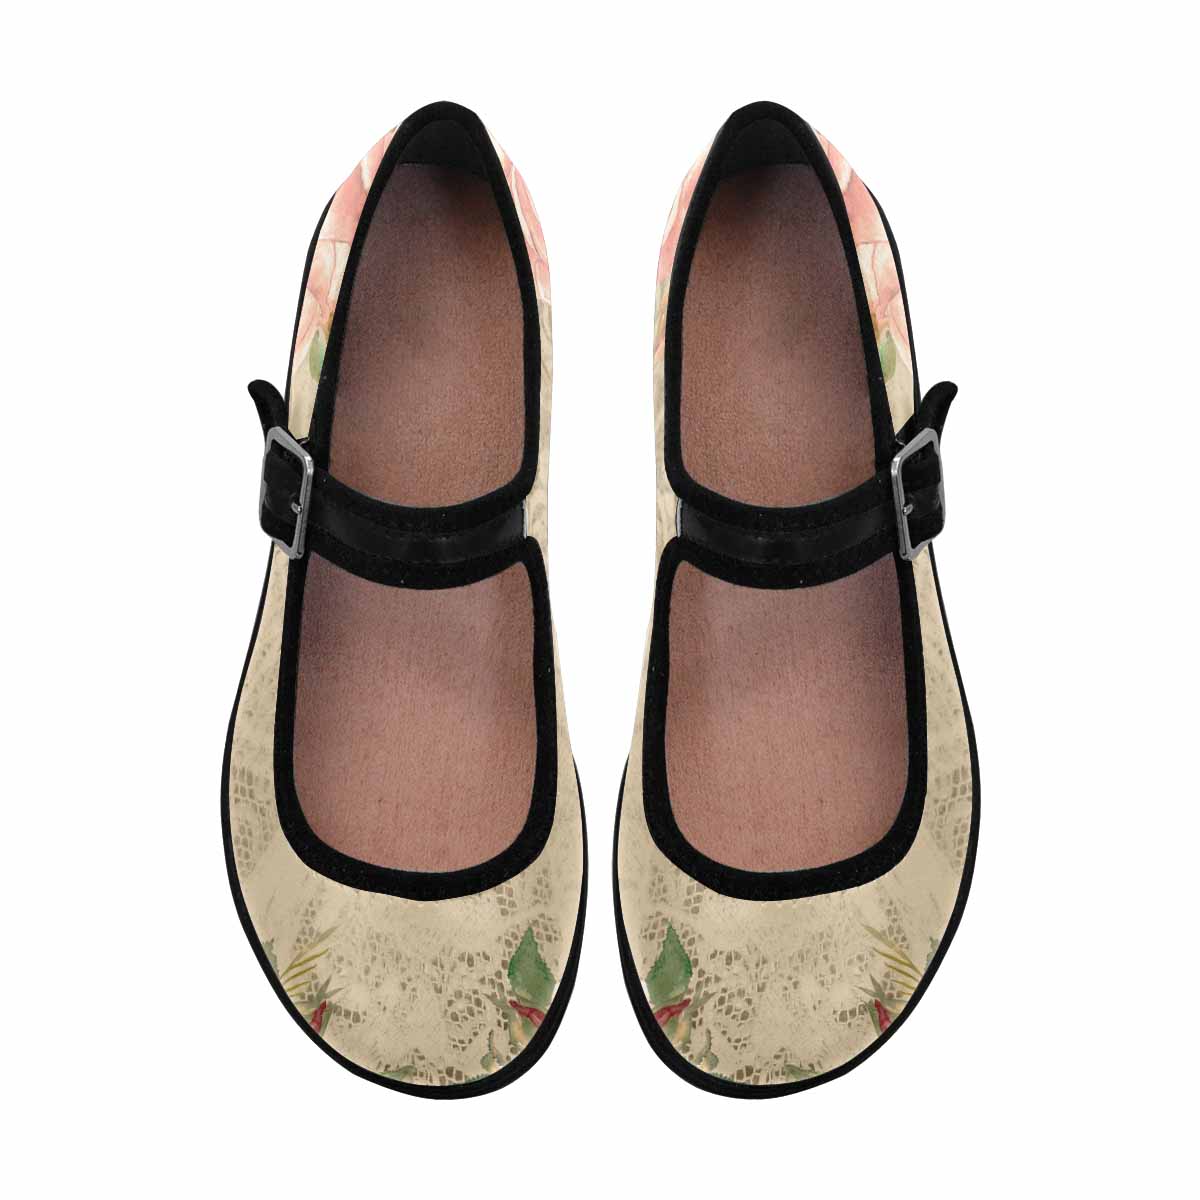 Victorian lace print, cute, vintage style women's Mary Jane shoes, design 25